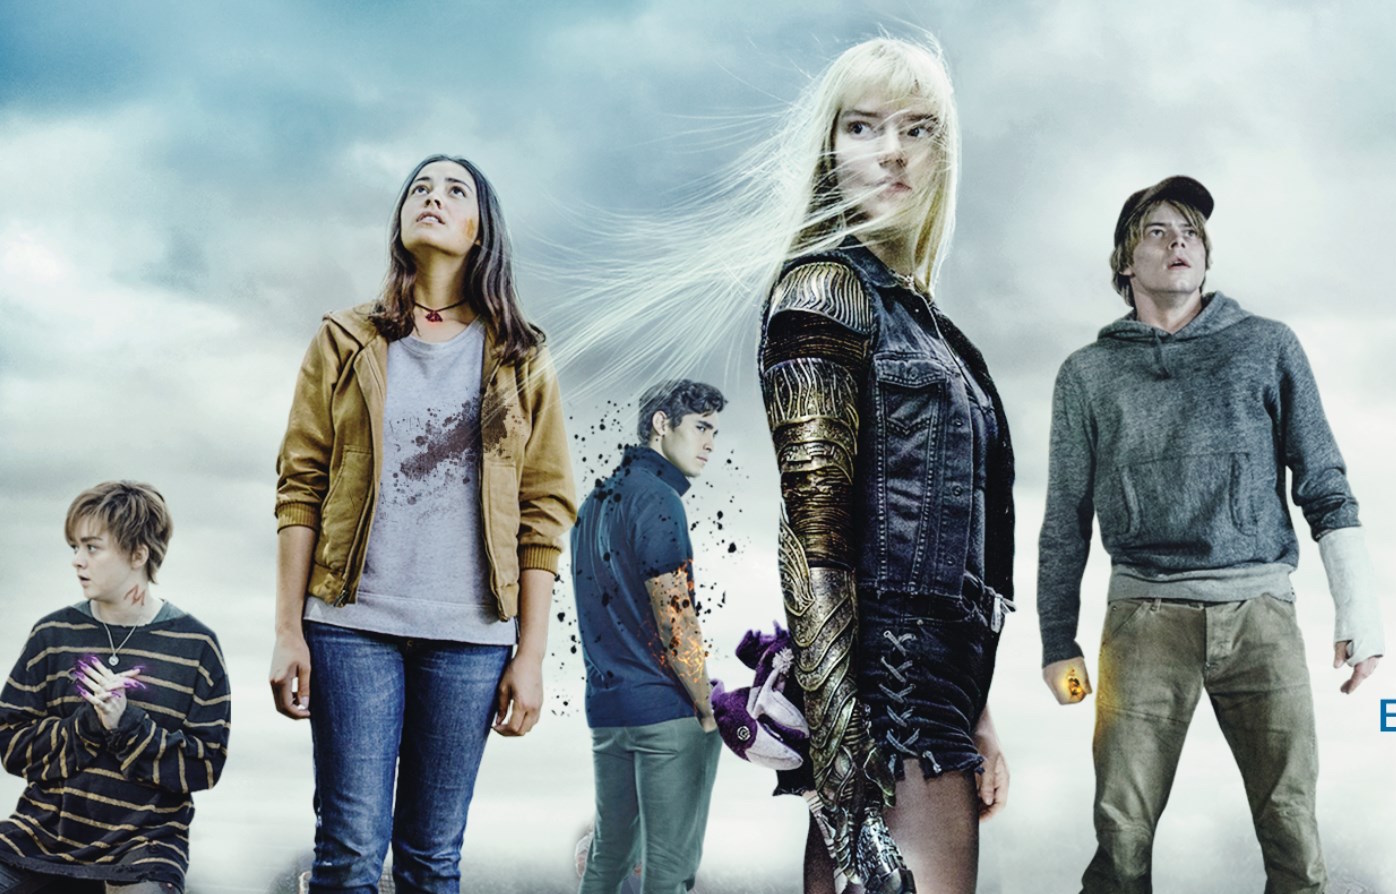 While 'The New Mutants' Has Fun with its Teen Horror Aspects